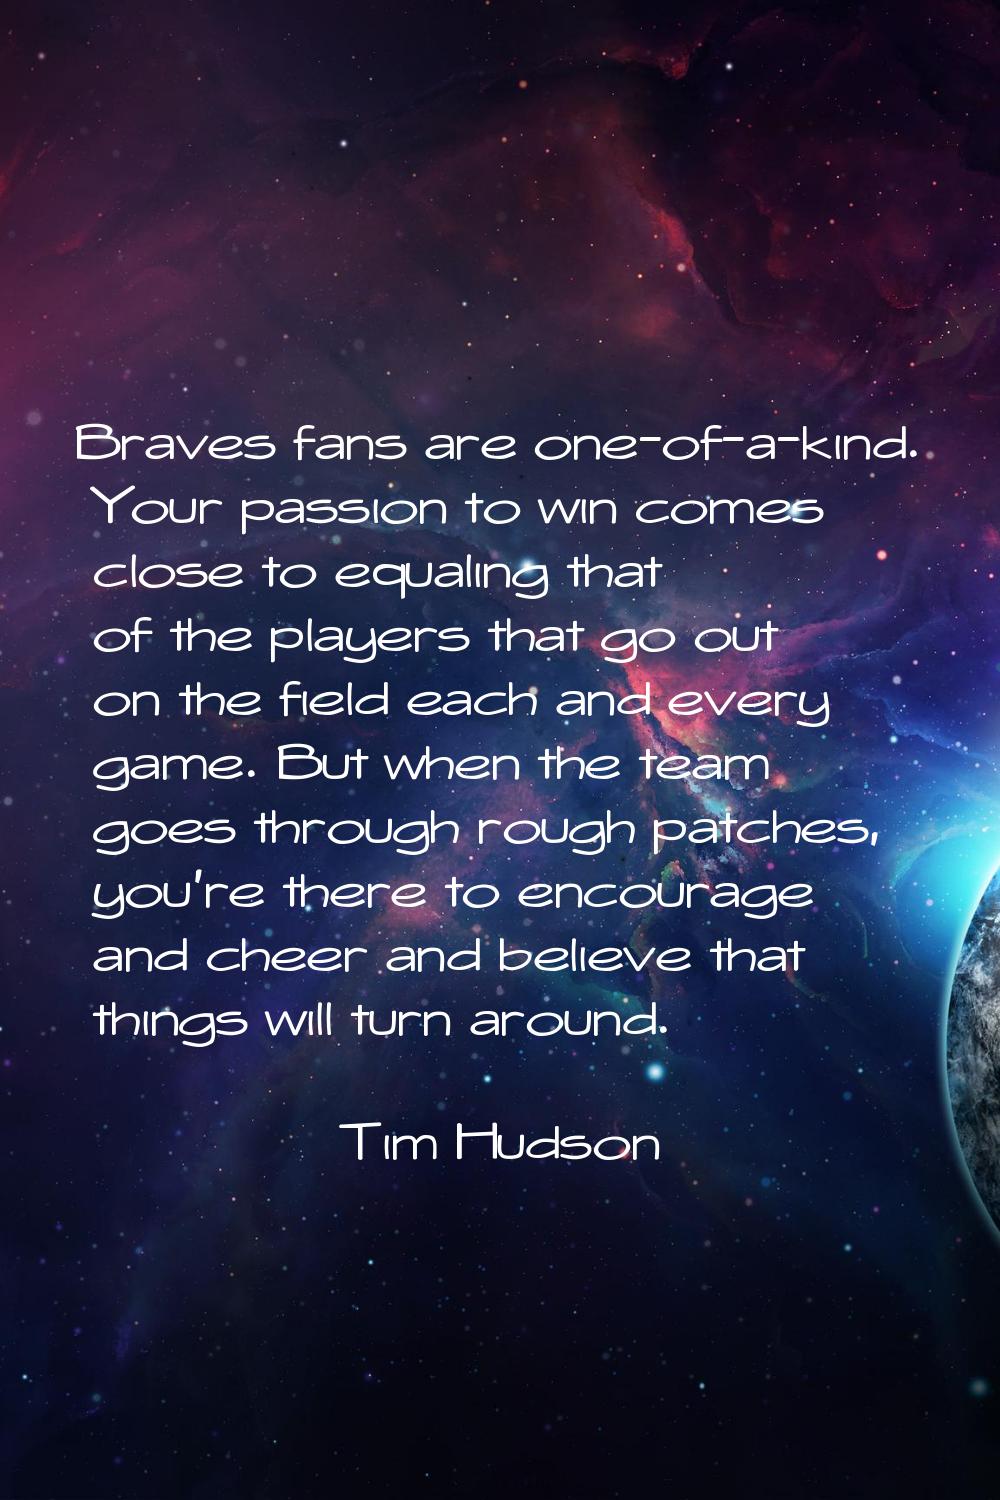 Braves fans are one-of-a-kind. Your passion to win comes close to equaling that of the players that